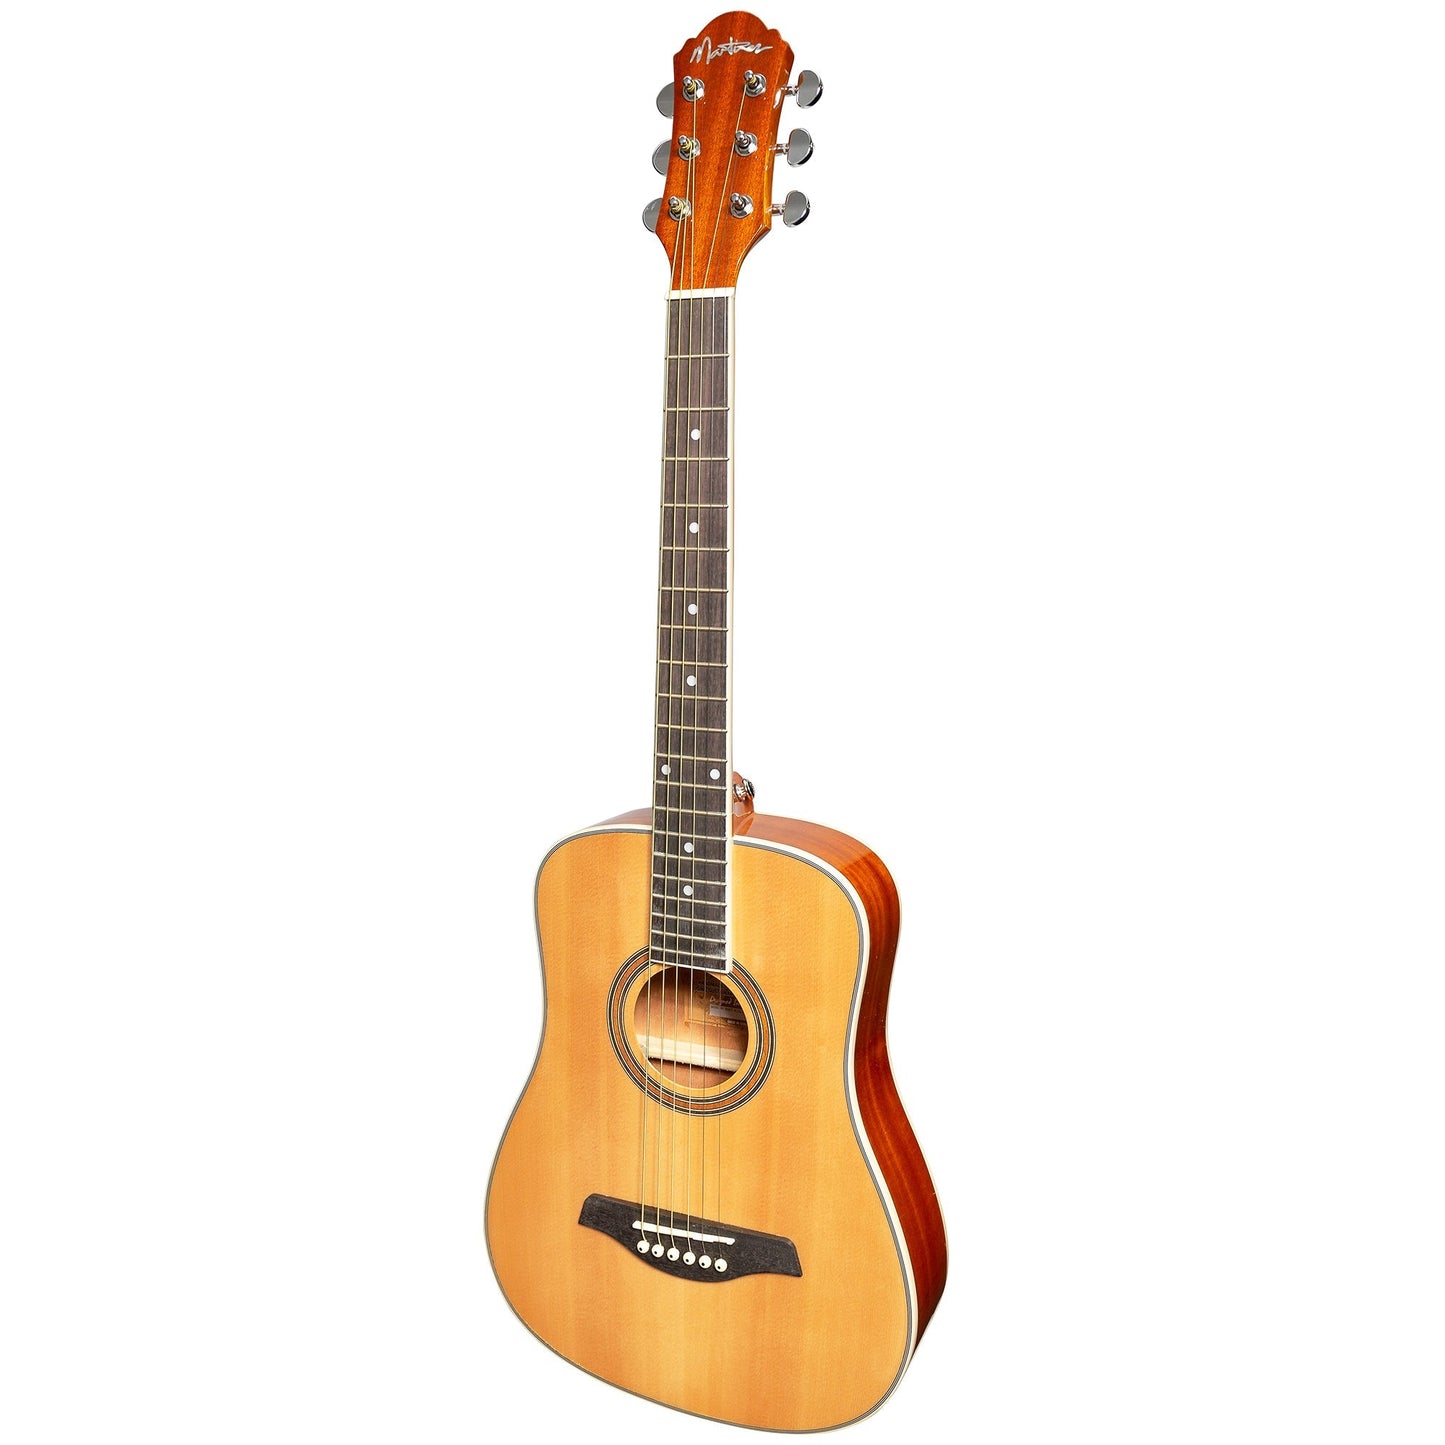 Martinez '41 Series' Spruce Acoustic-Electric Babe Traveller Guitar (Gloss)